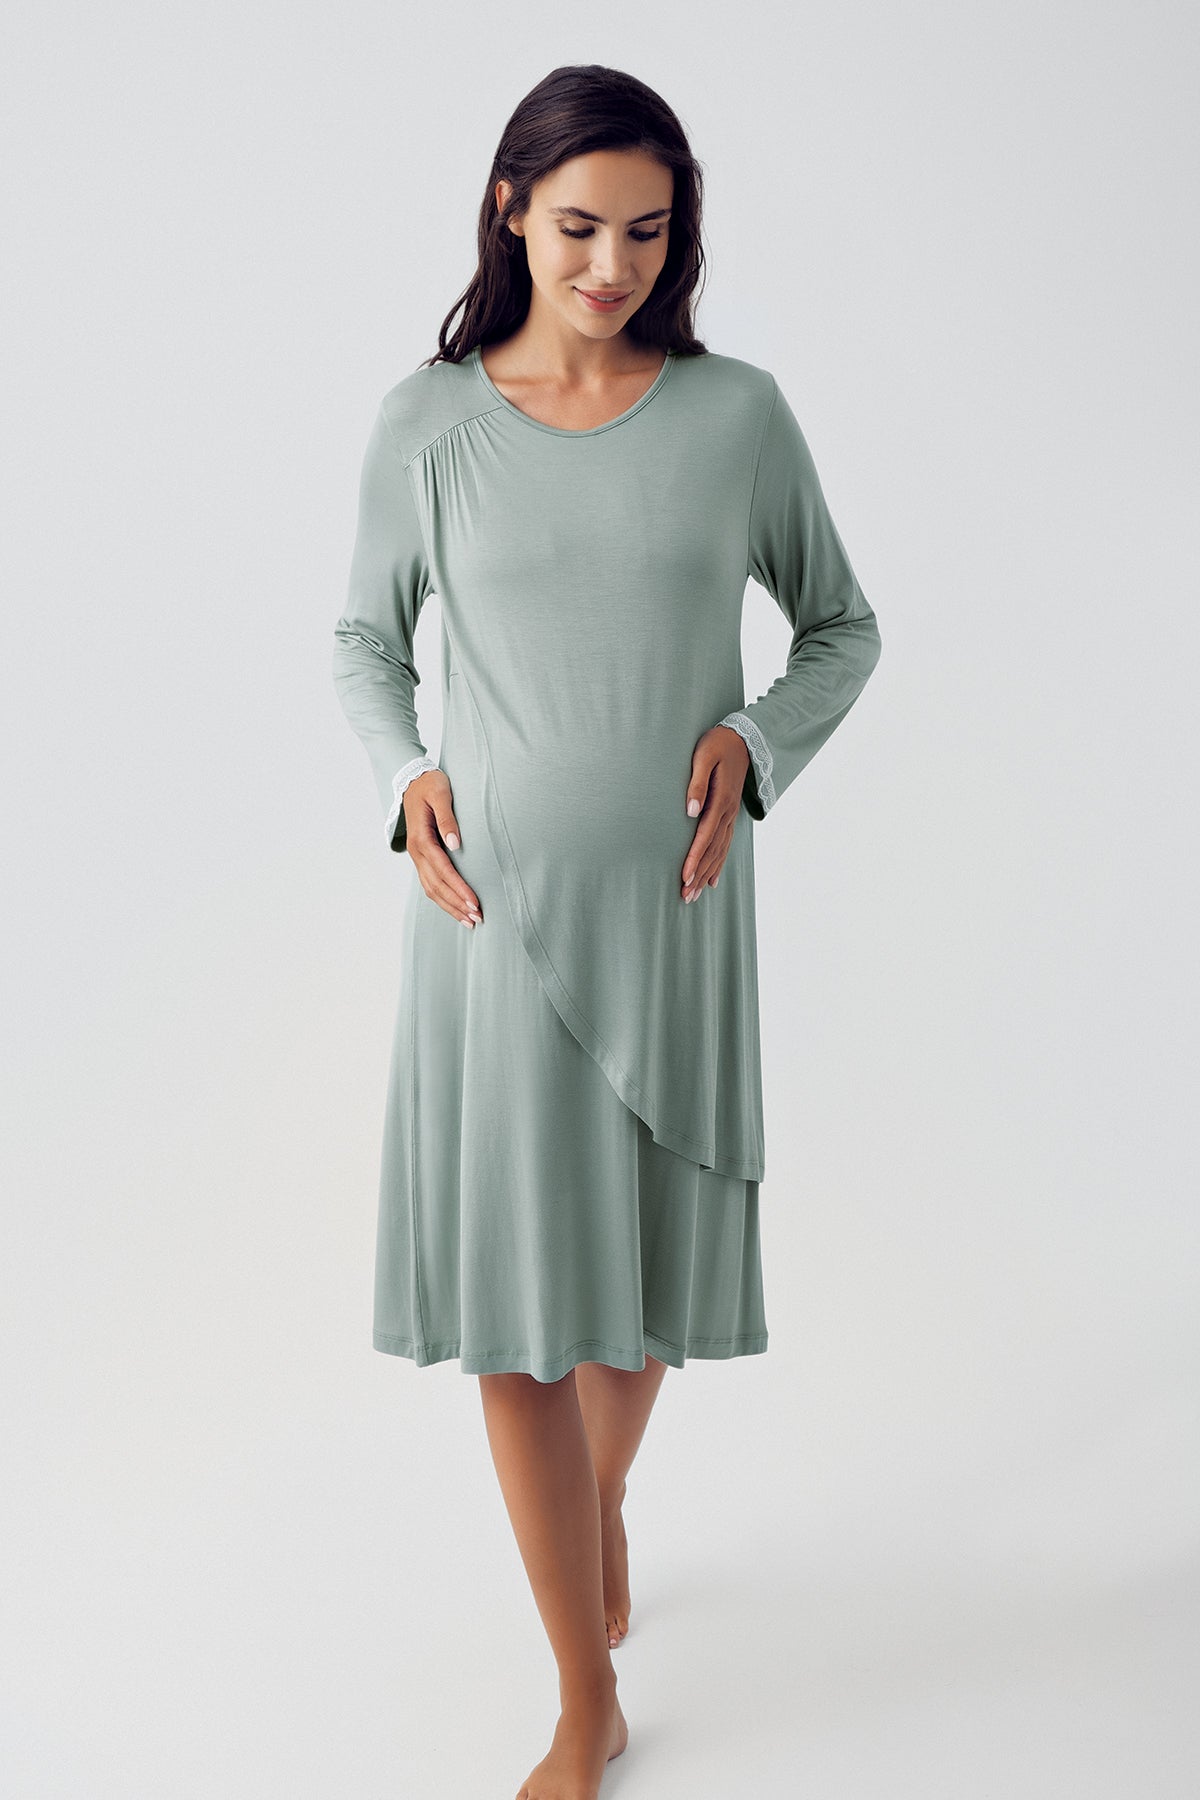 Shopymommy 15409 Wide Double Breasted Maternity & Nursing Nightgown With Flowery Robe Green